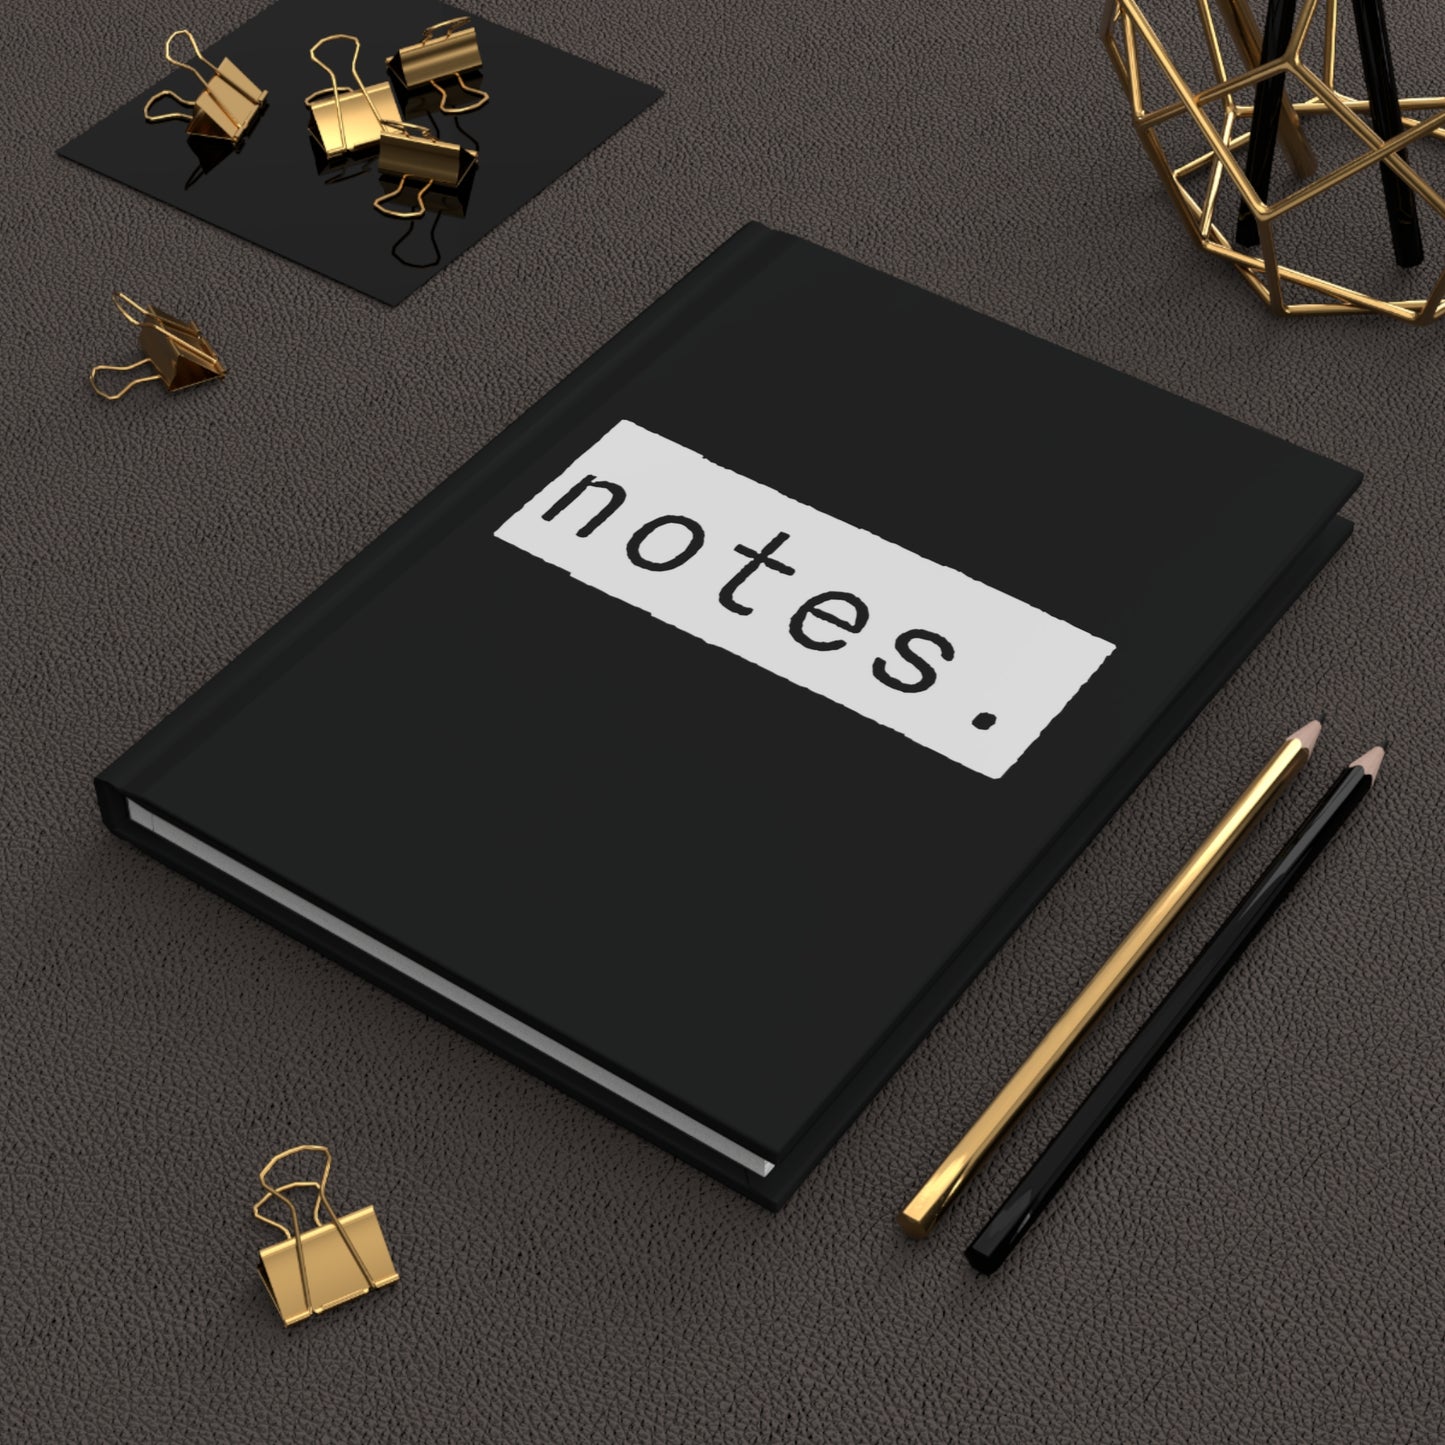 Notes Black Matte Hardcover Journal | Blank Book for Notetaking | Lined Notebook Diary Dream Log